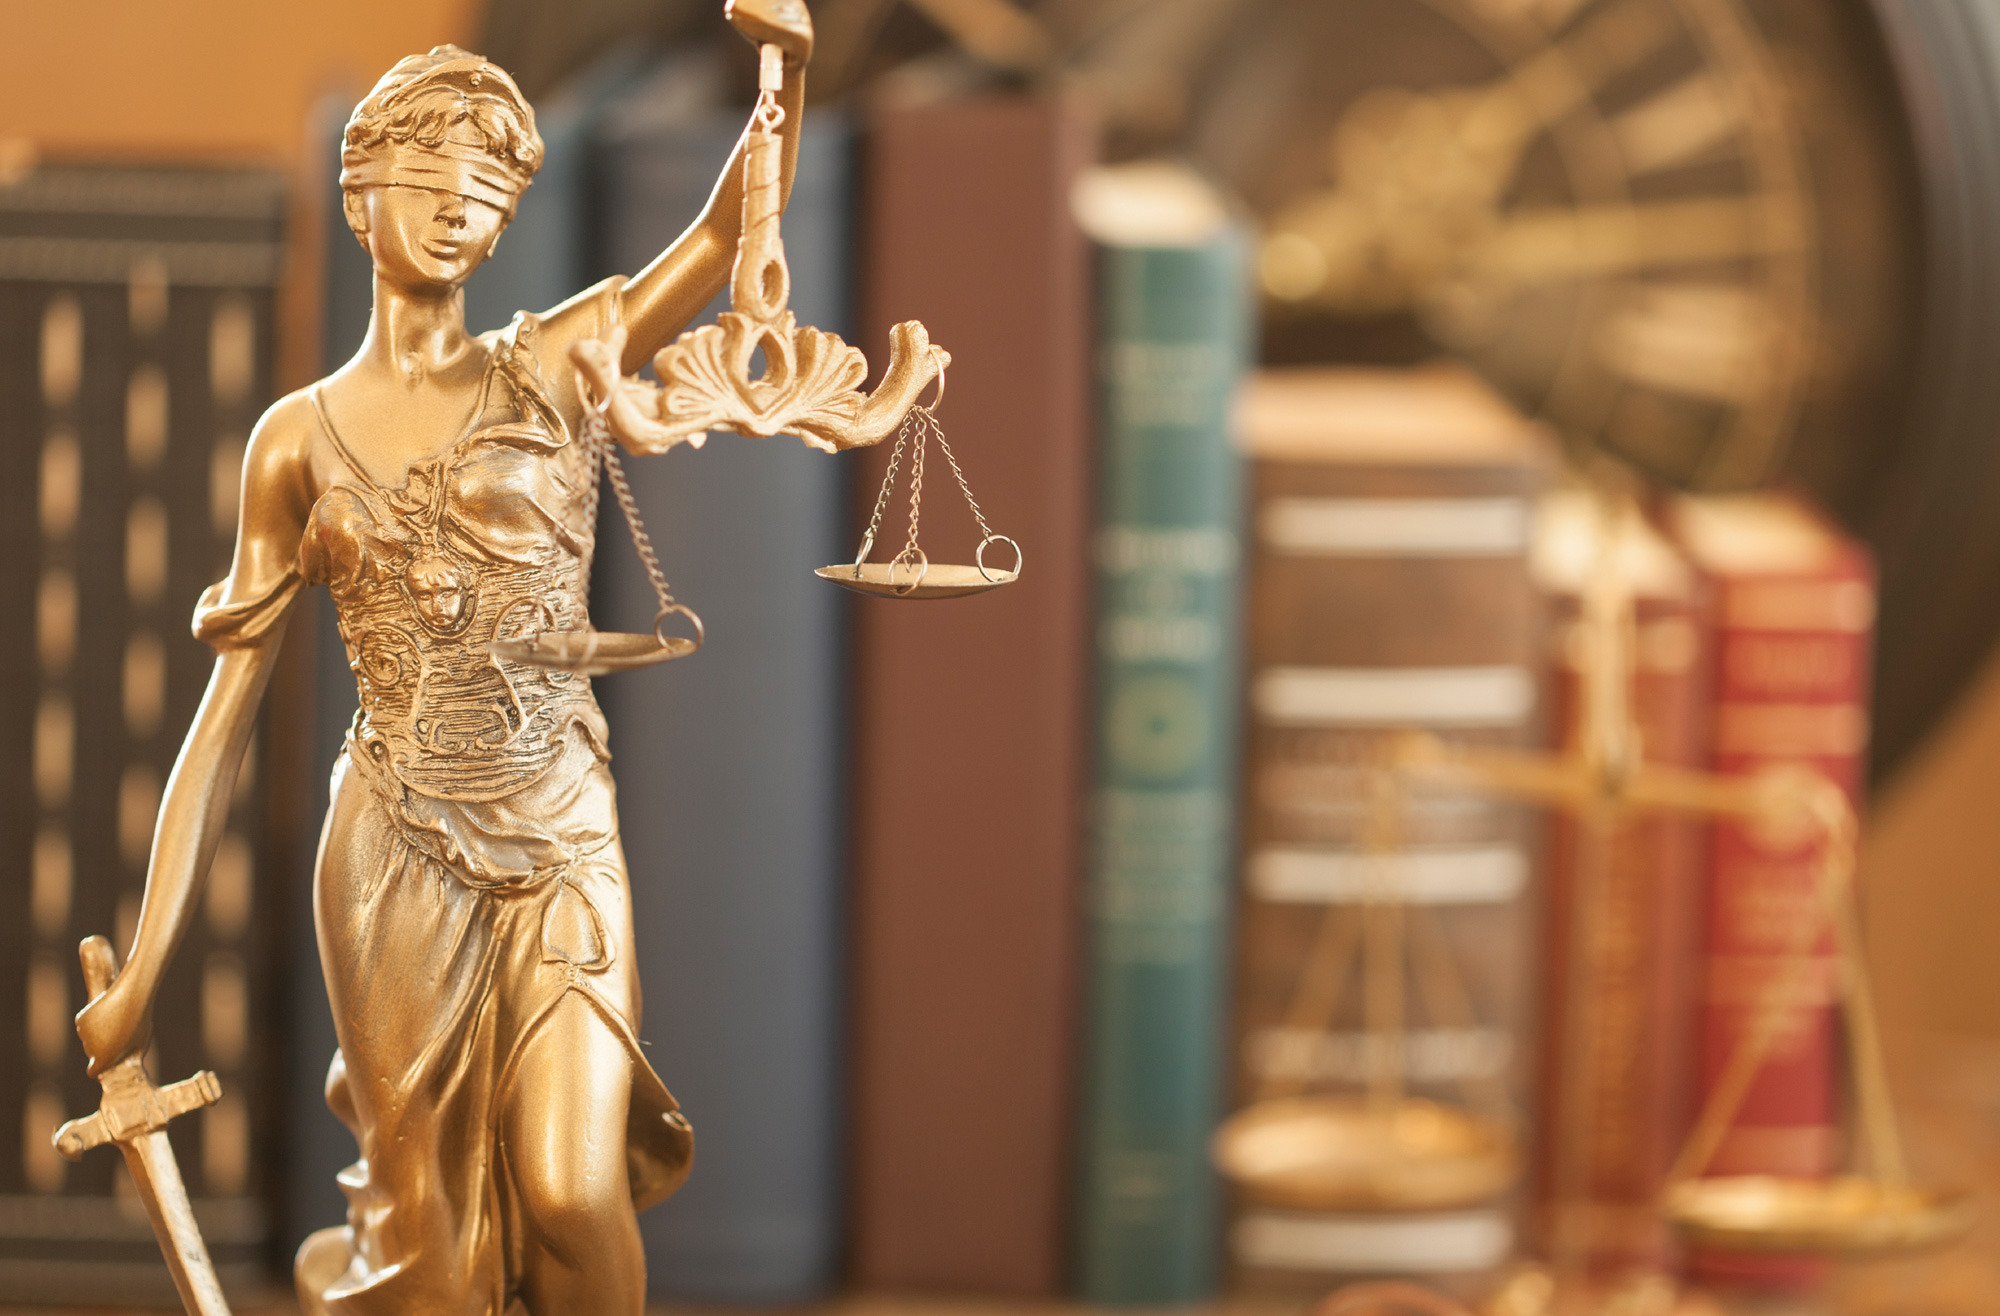 Webinar: The Ideal of the Rule of Law and Why it Matters